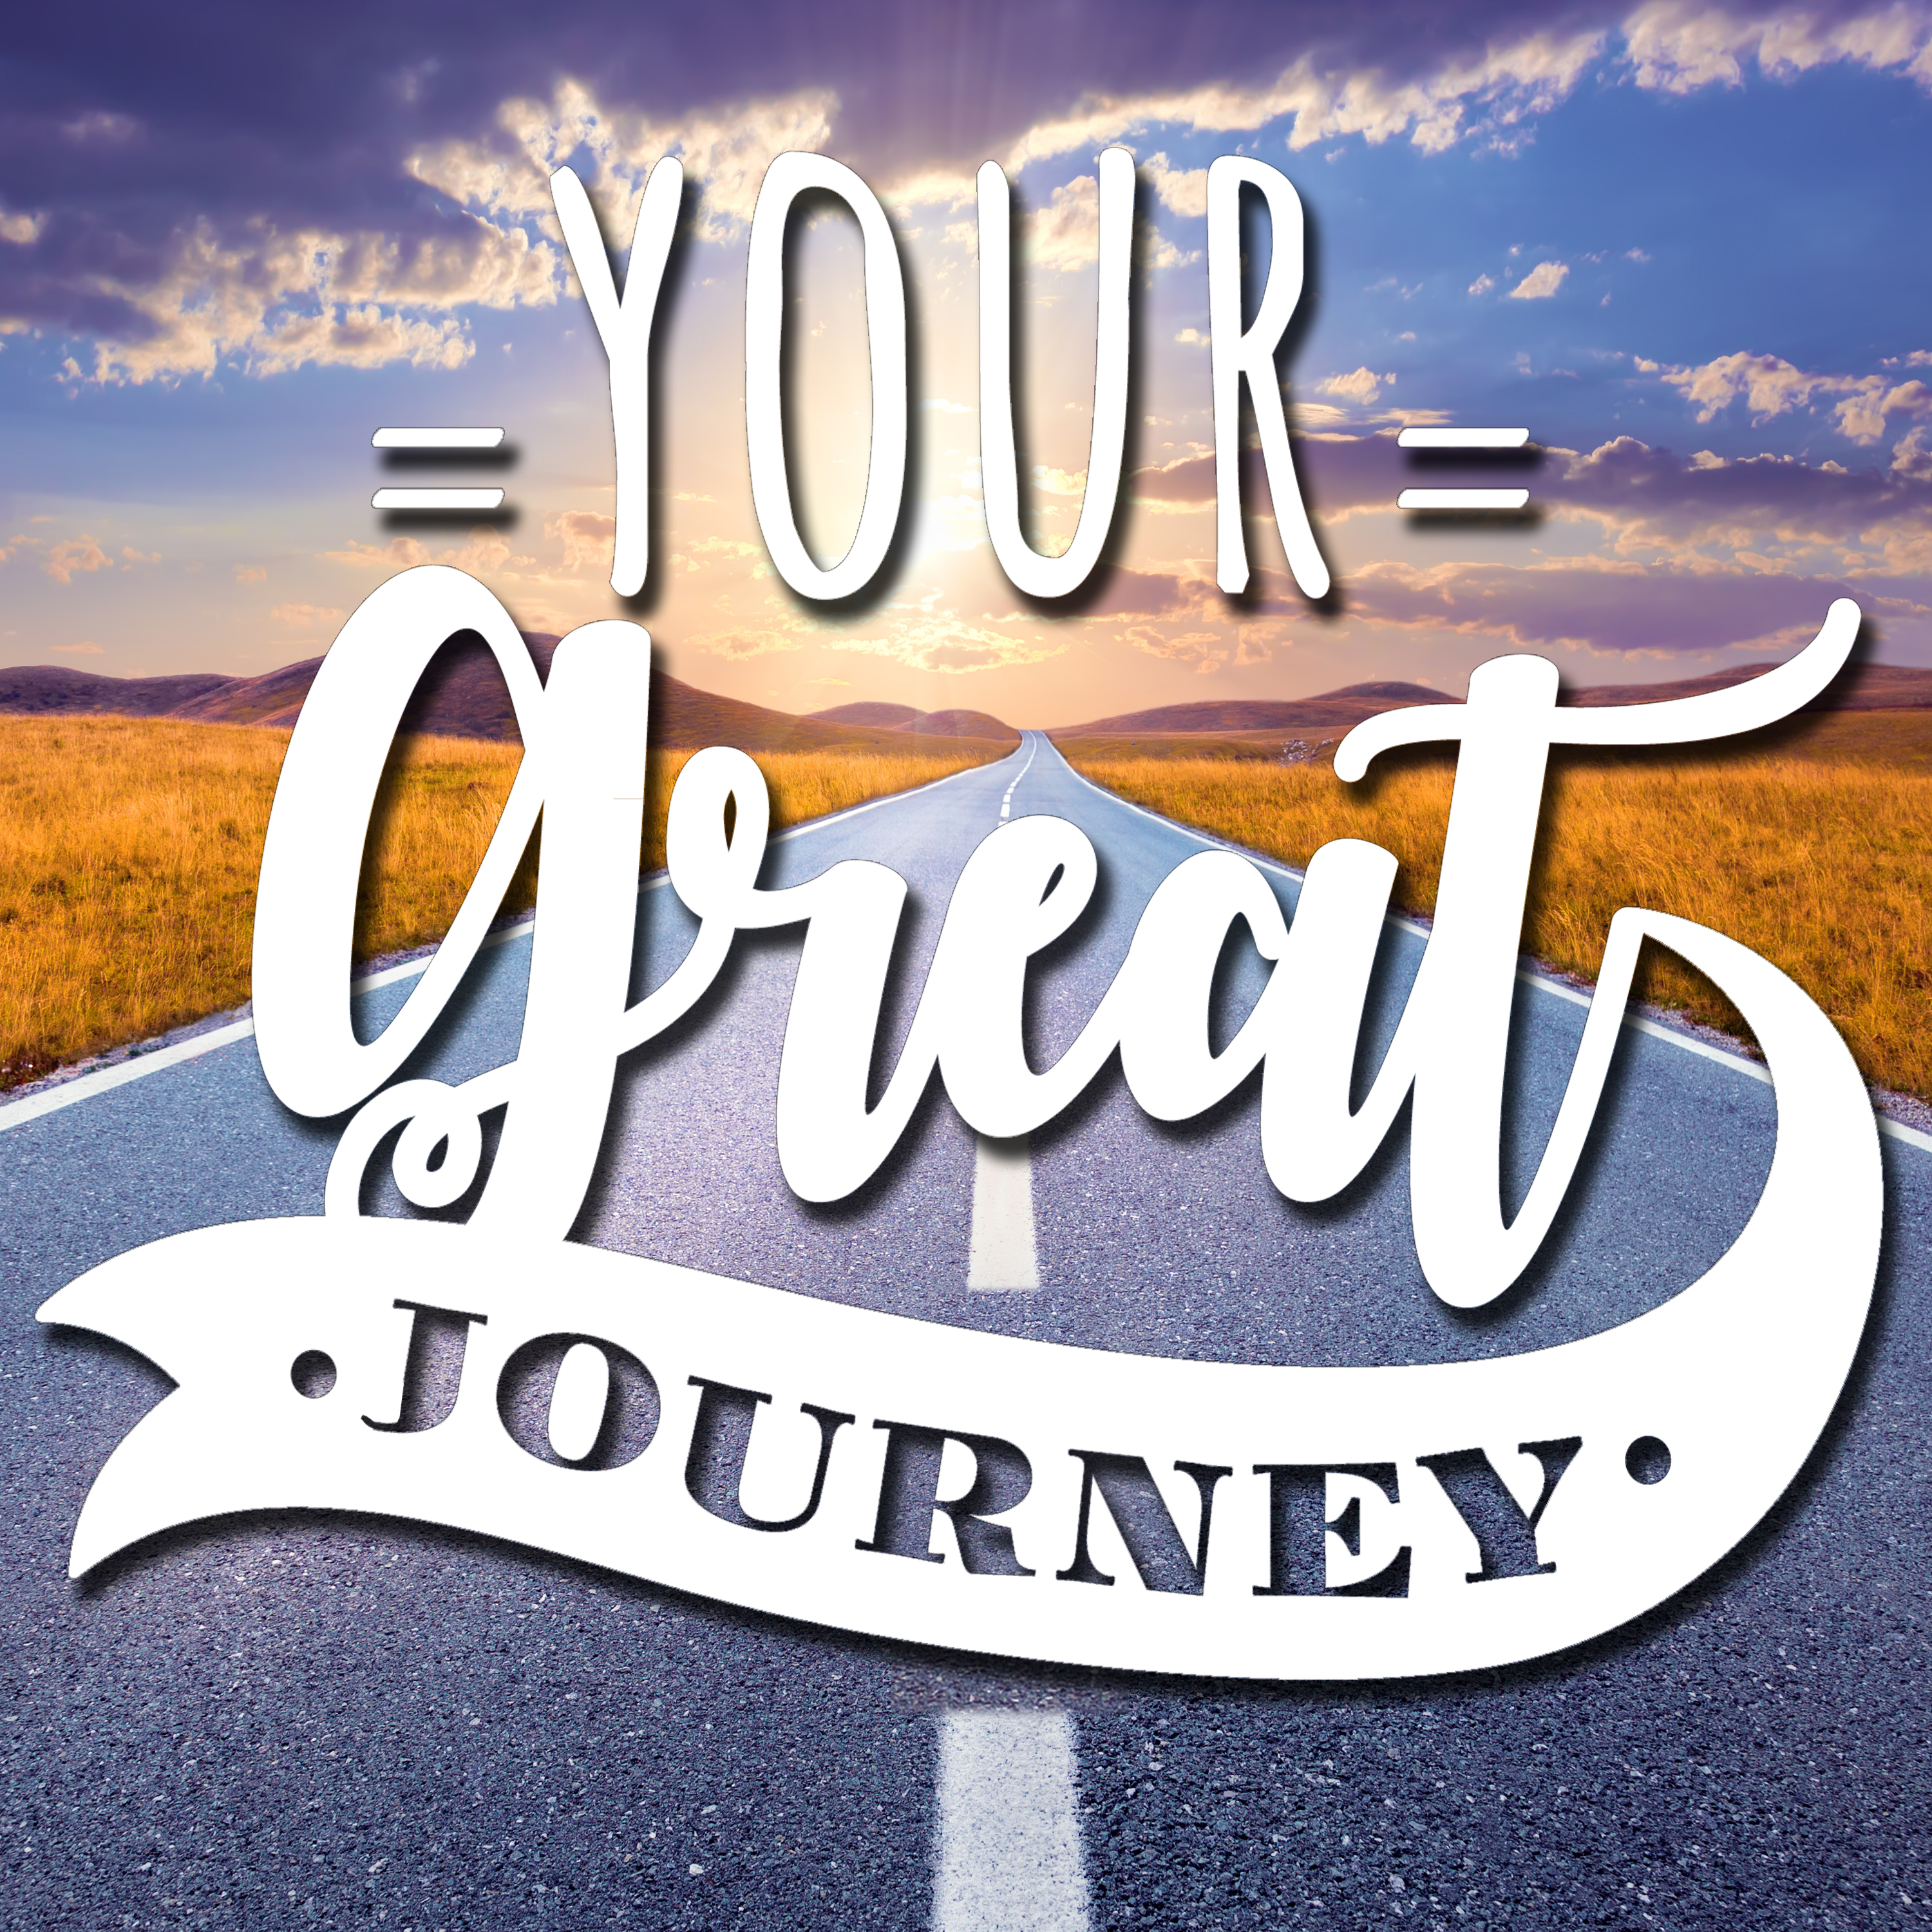 Home - Your Great Journey